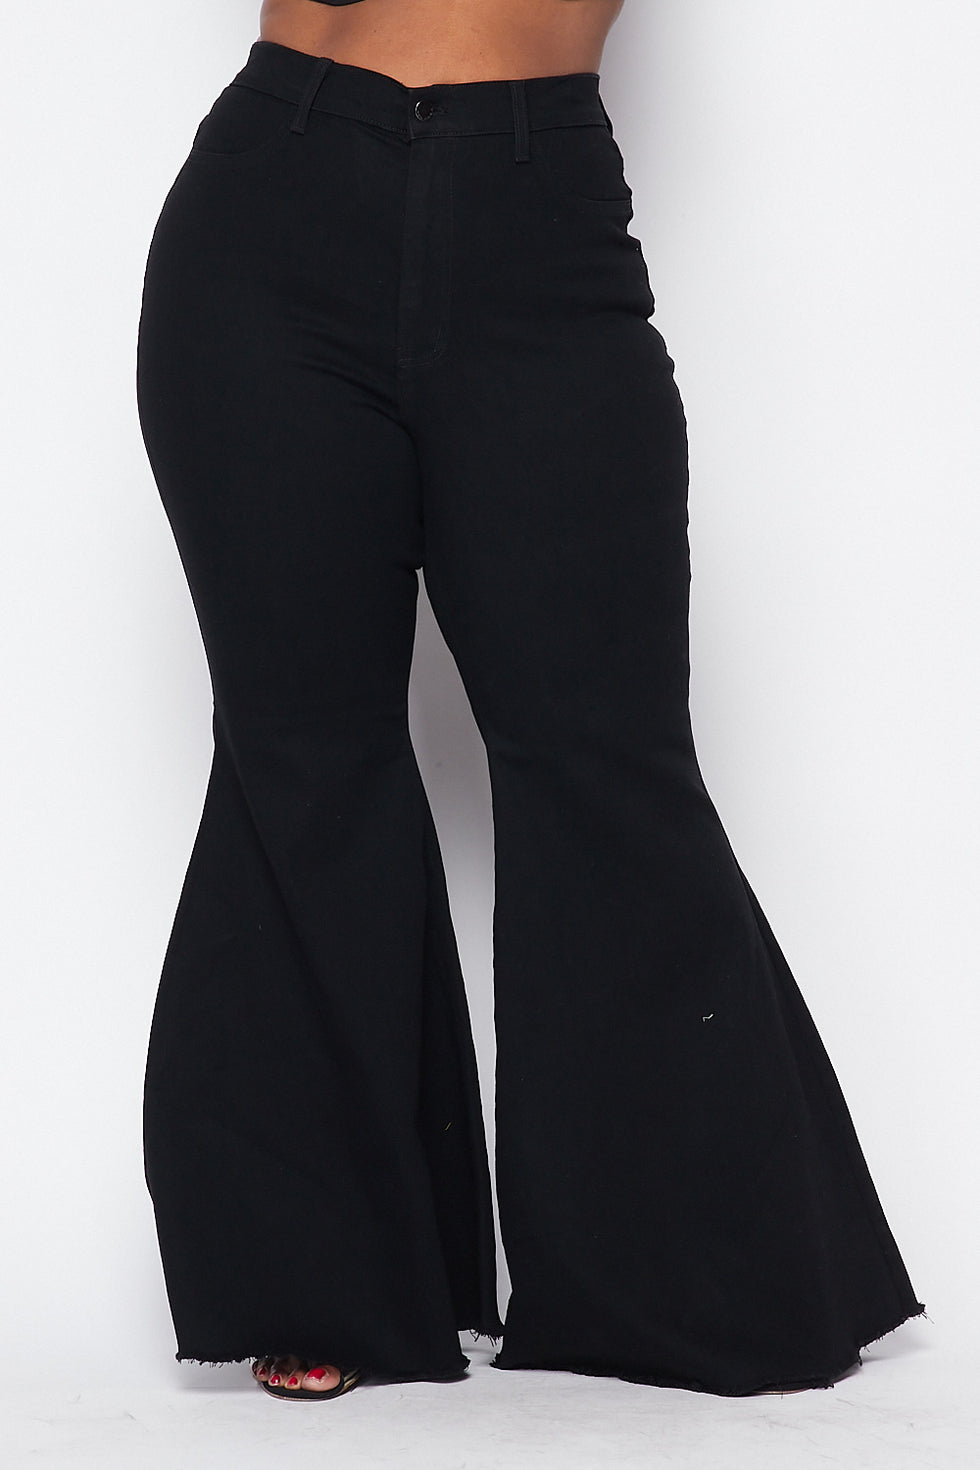 Plus Size High Waisted Super Flare Bell Bottoms Jeans - Black ...